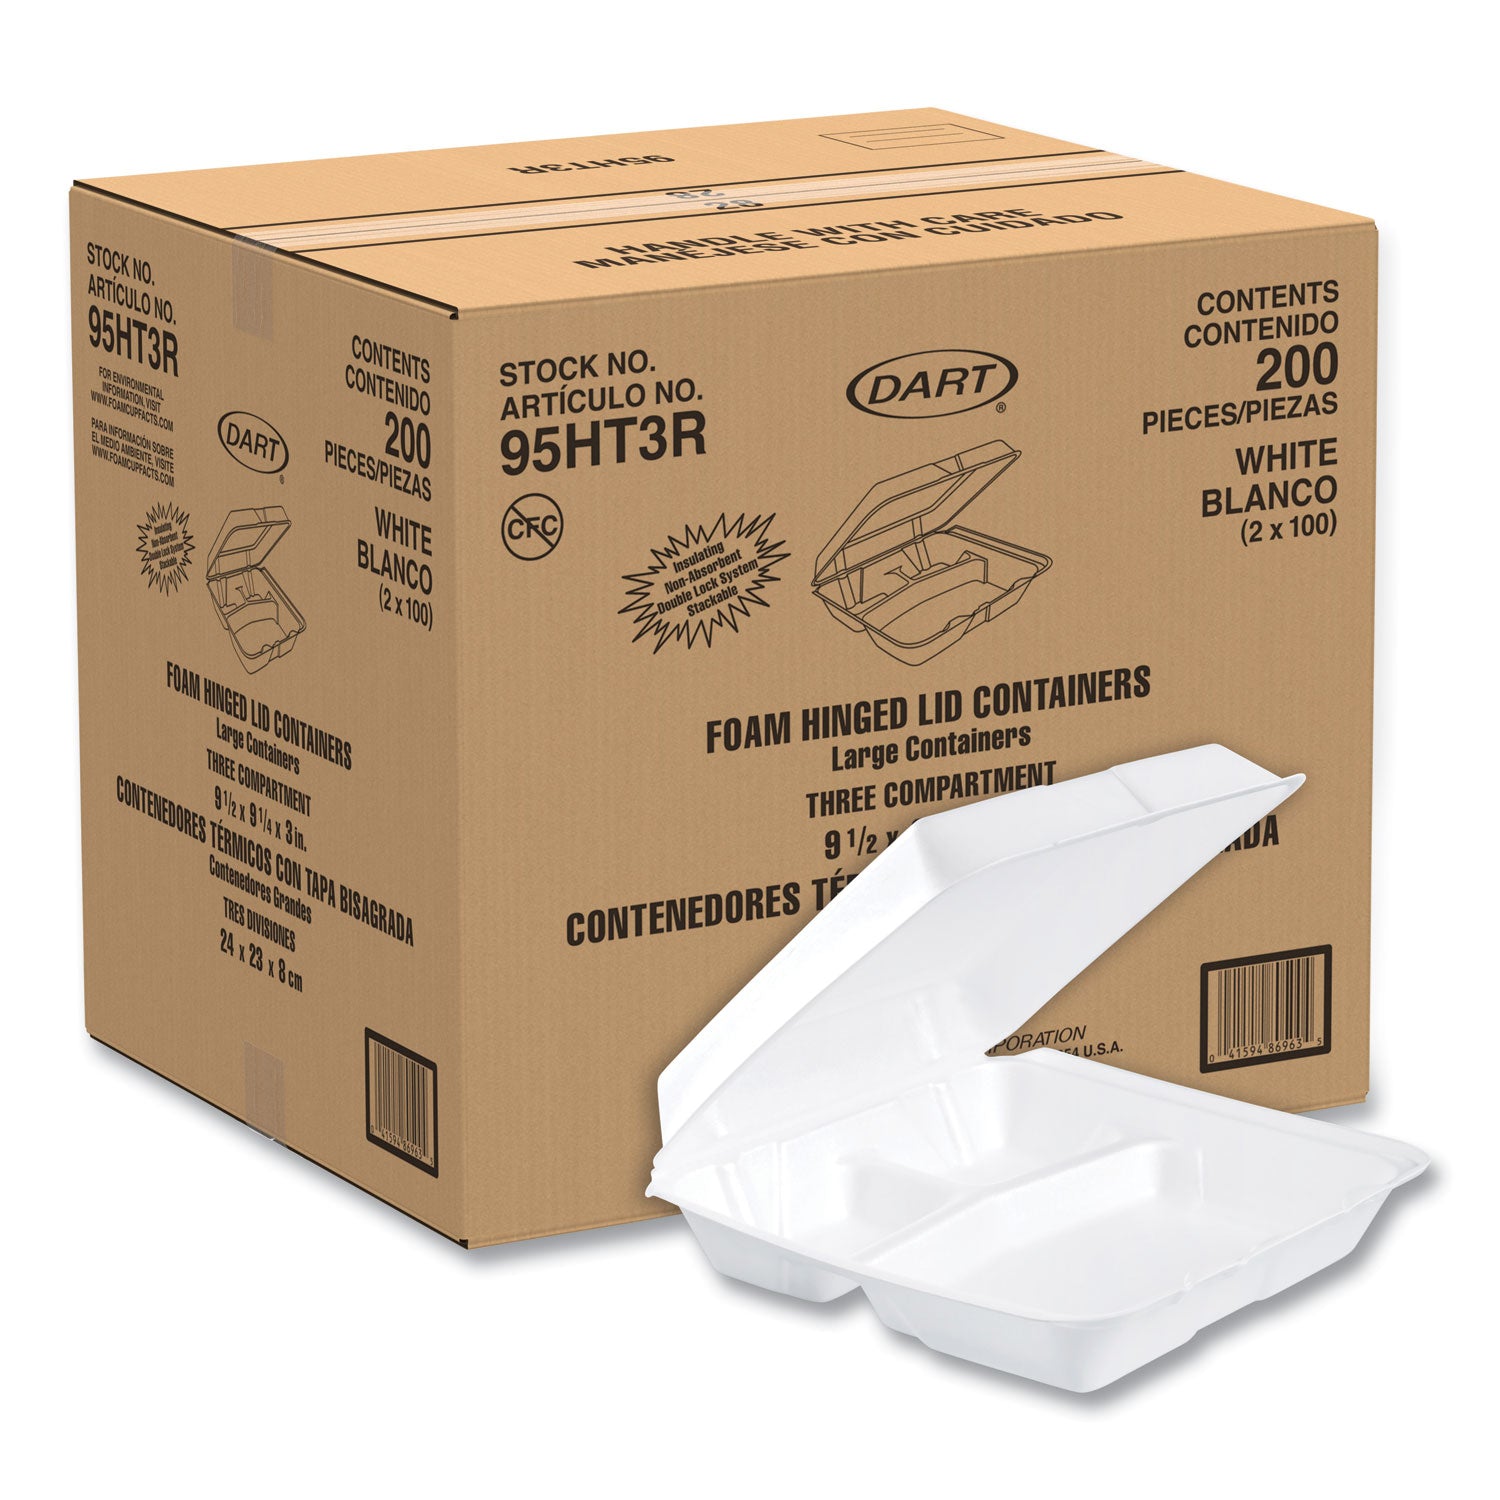 Foam Hinged Lid Containers, 3-Compartment, 9.25 x 9.5 x 3, White, 200/Carton - 